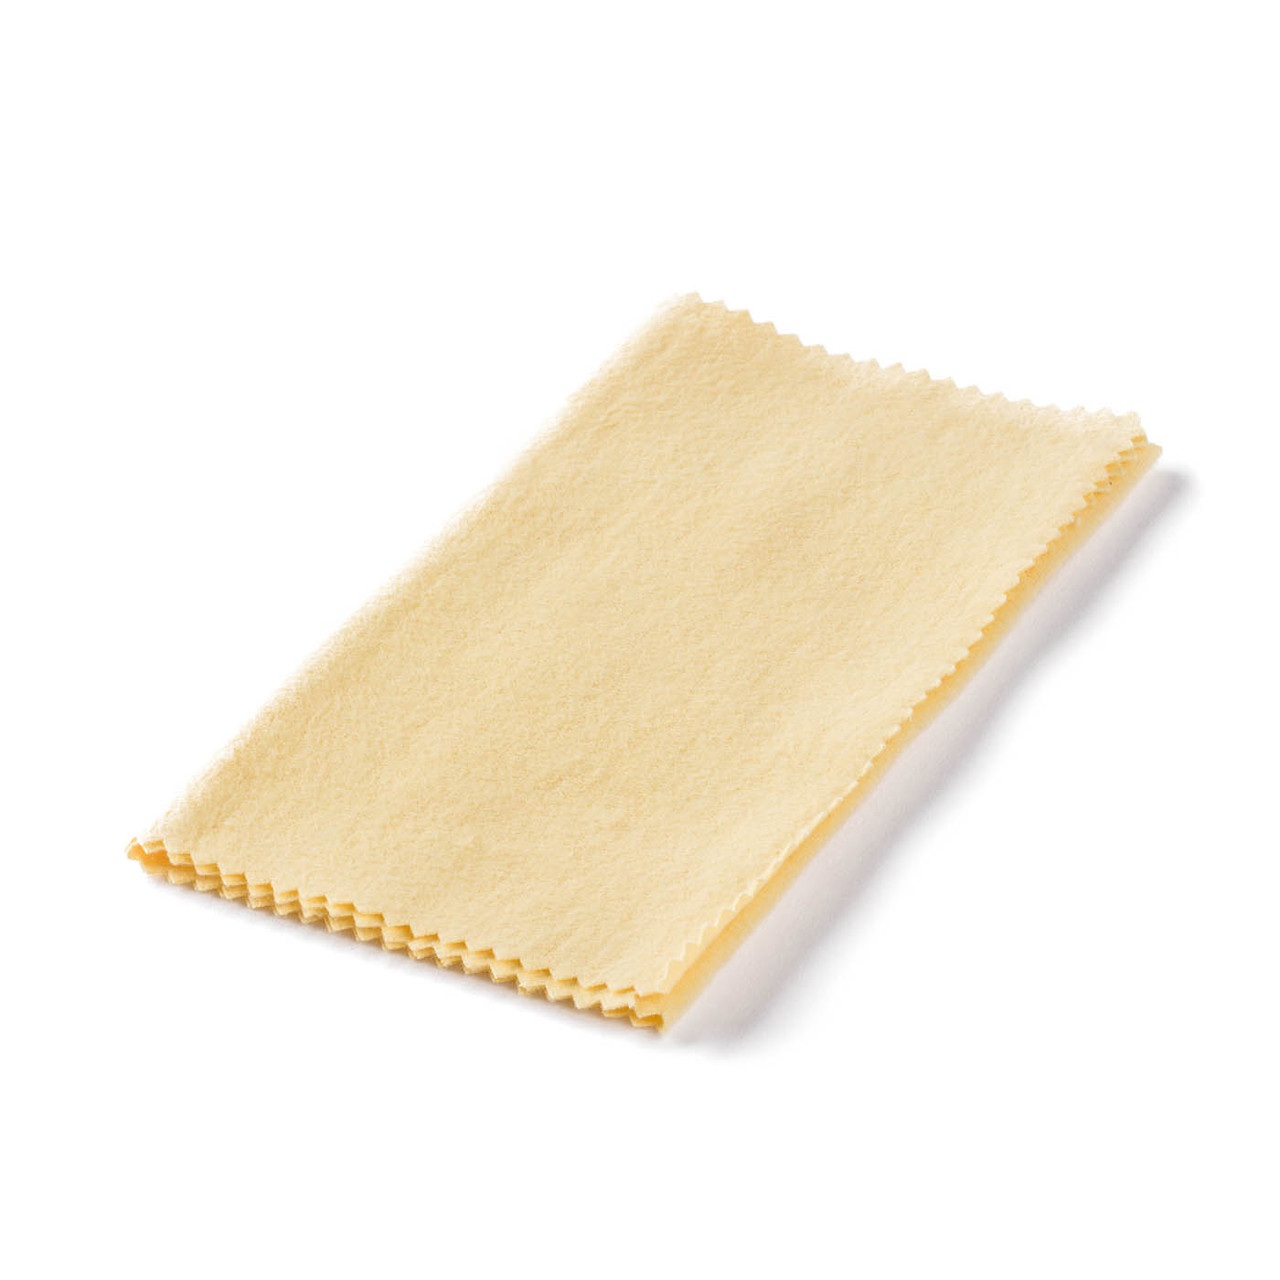 HERCO LACQUER CLEANING CLOTH - Dunlop